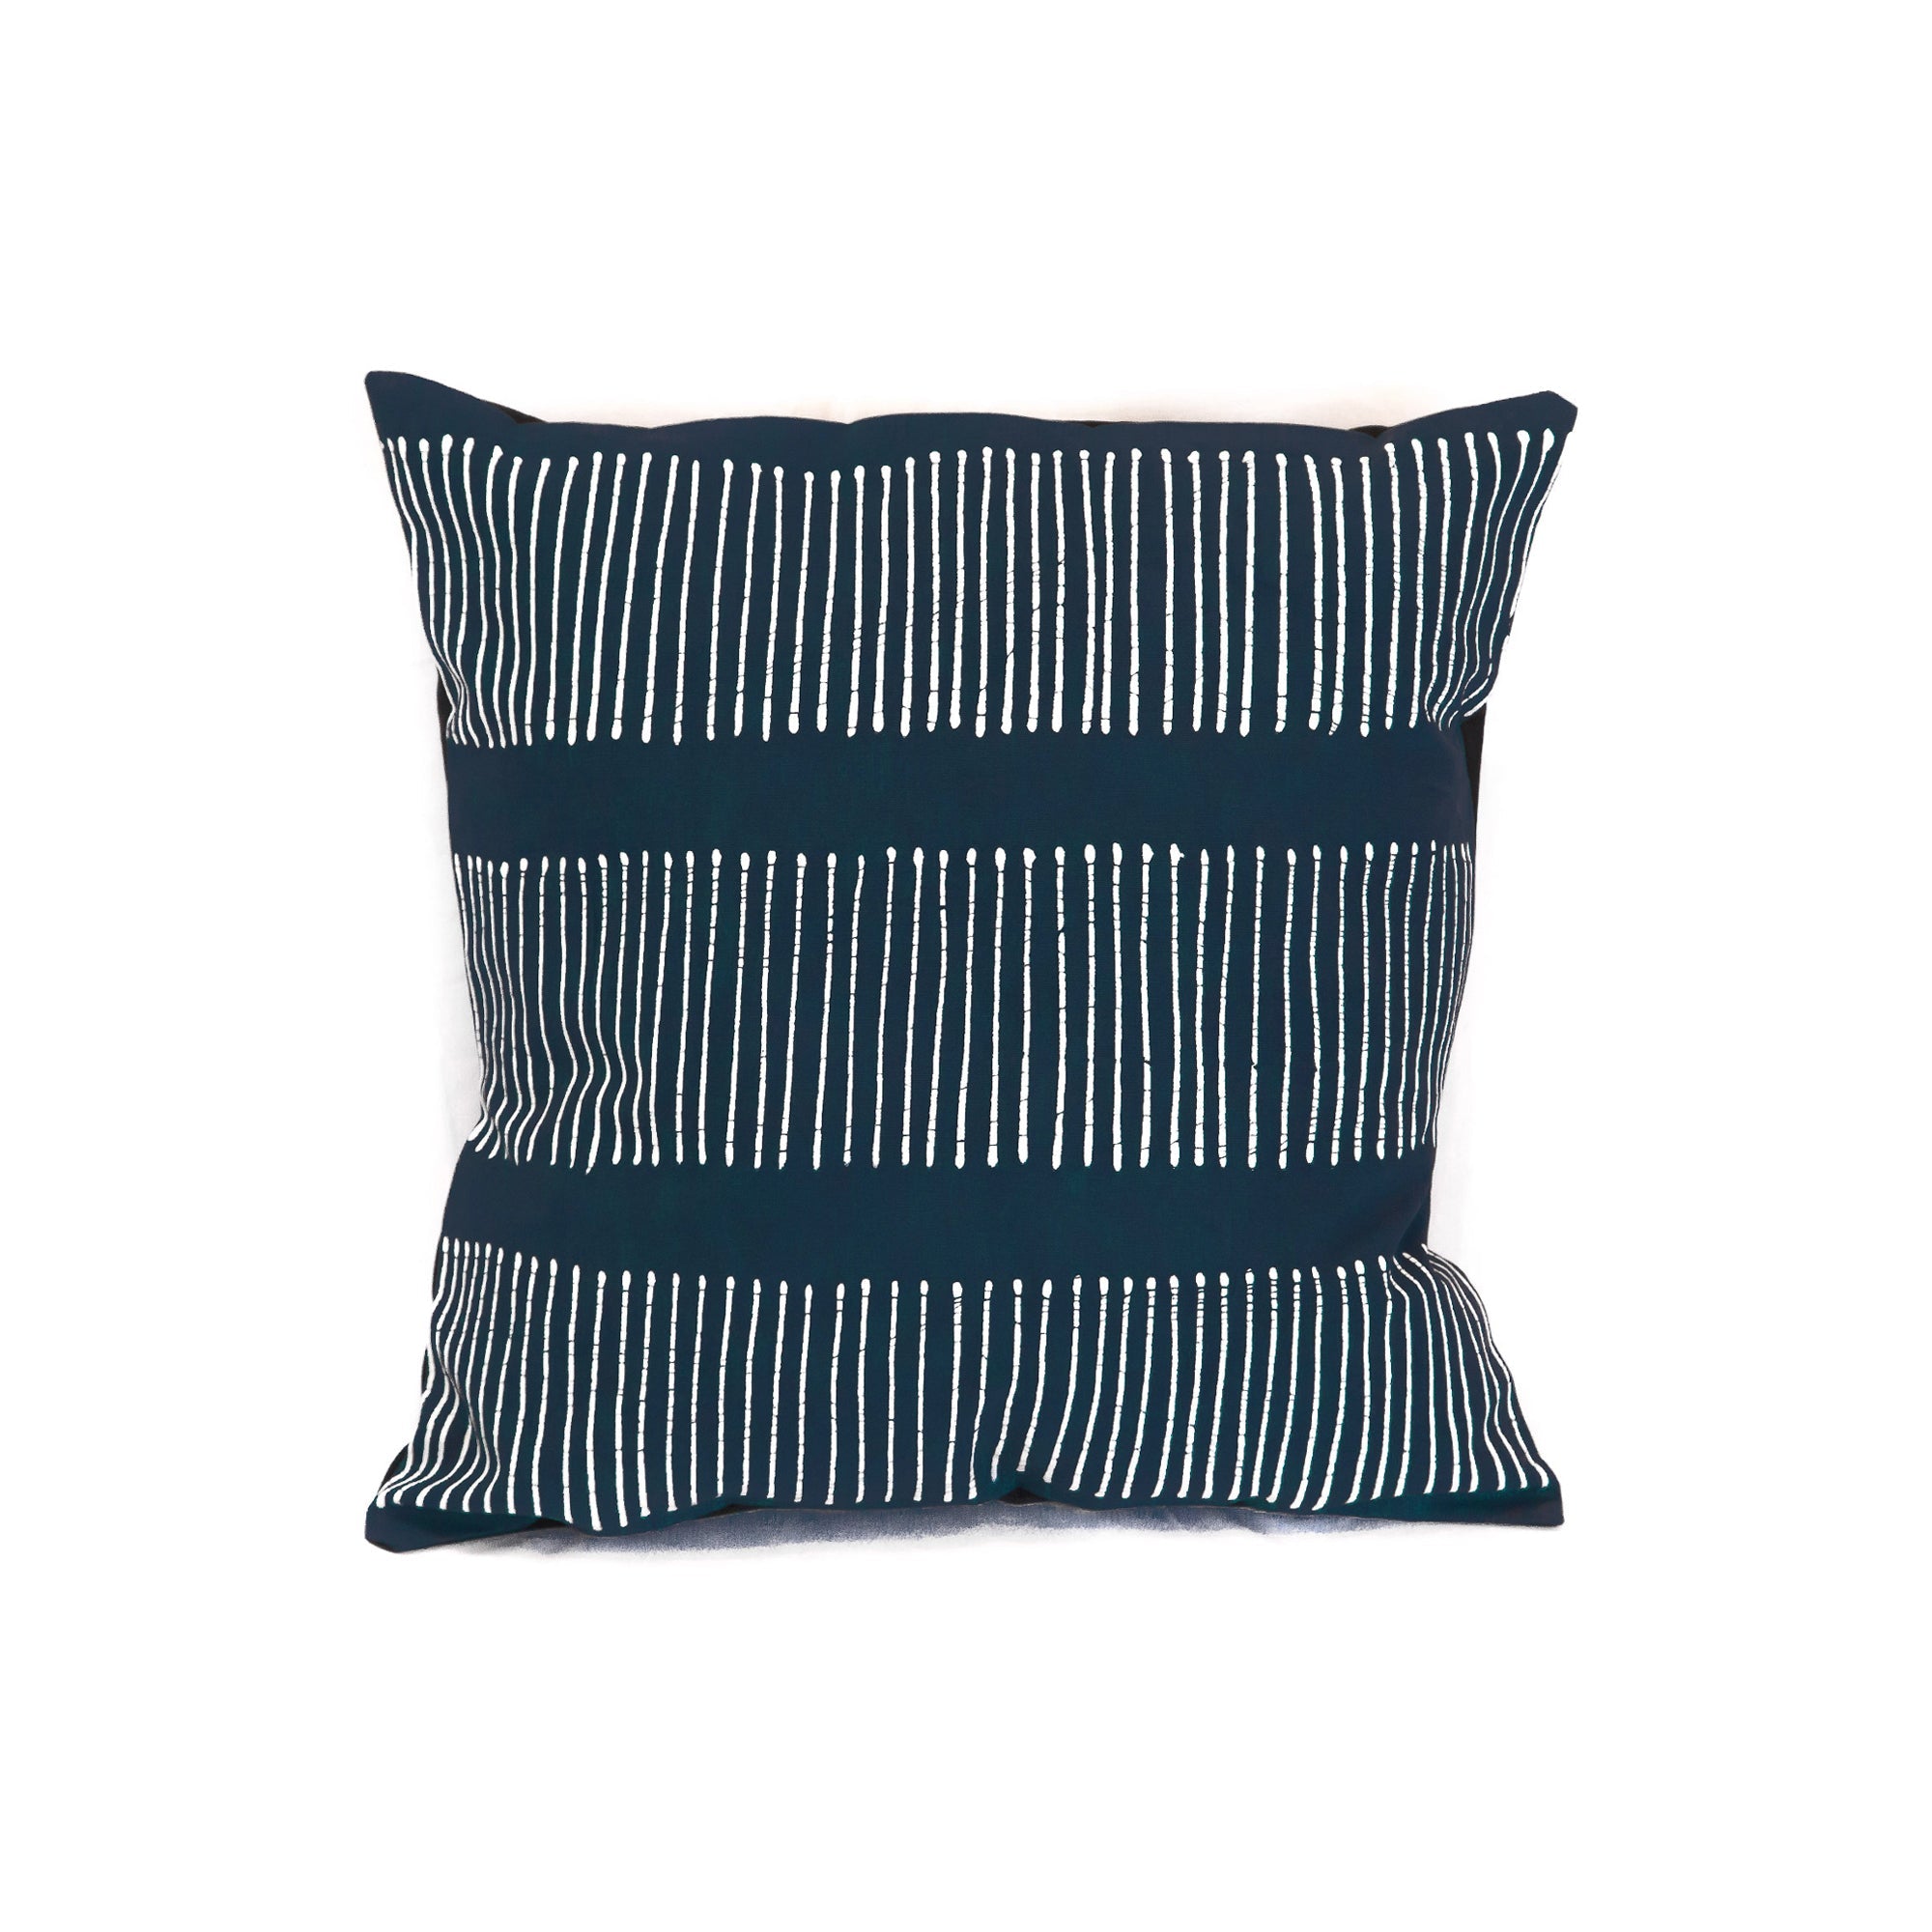 Tribal Cloth Indigo Lines Cushion Cover - Handmade by TRIBAL TEXTILES - Handcrafted Home Decor Interiors - African Made